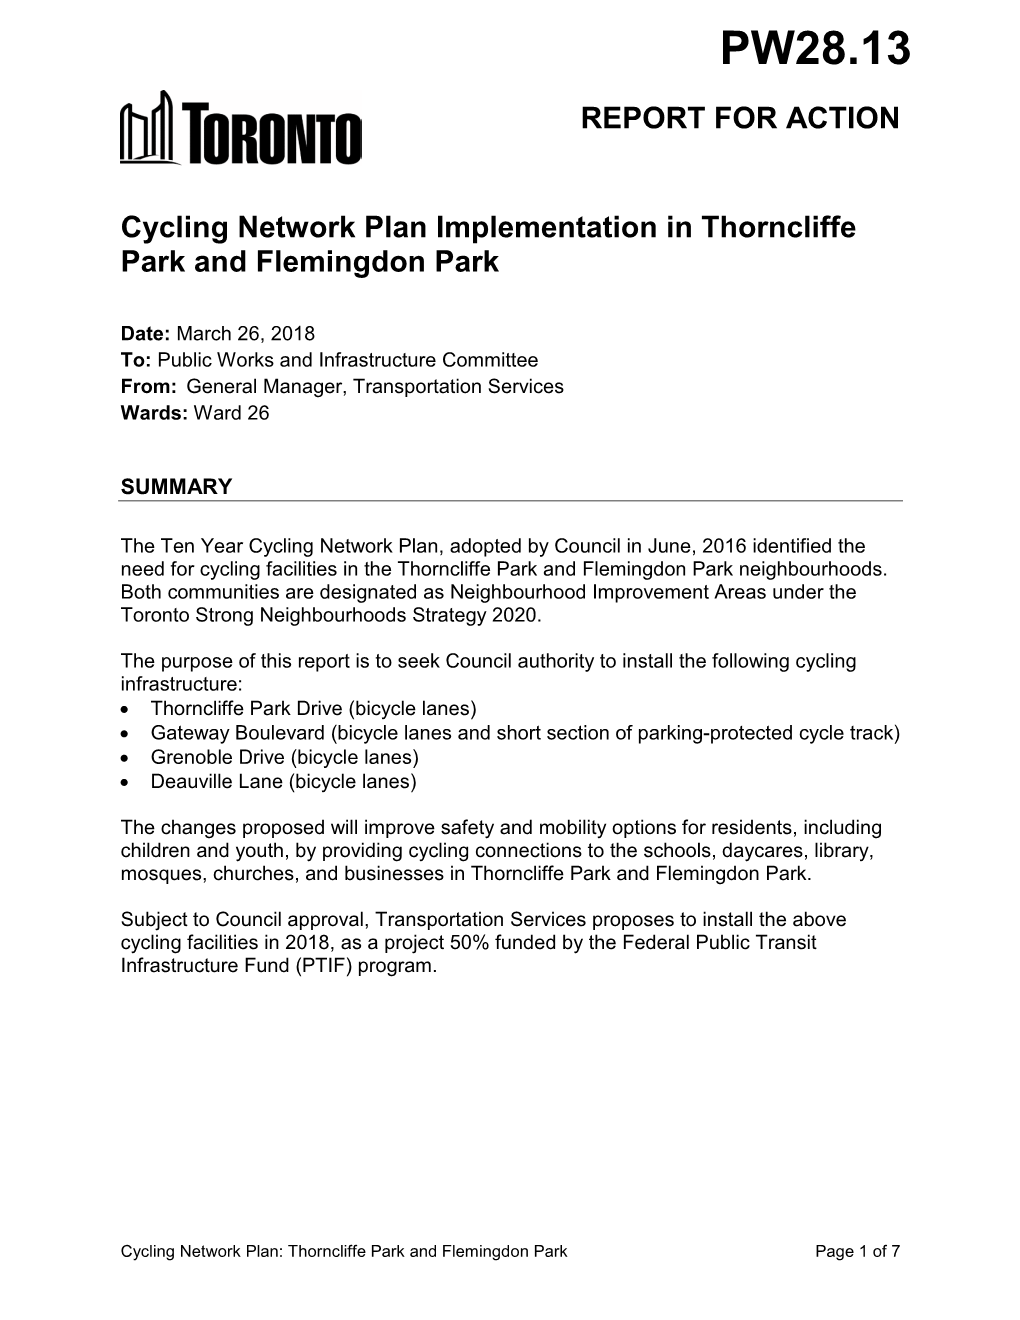 Cycling Network Plan Implementation in Thorncliffe Park and Flemingdon Park